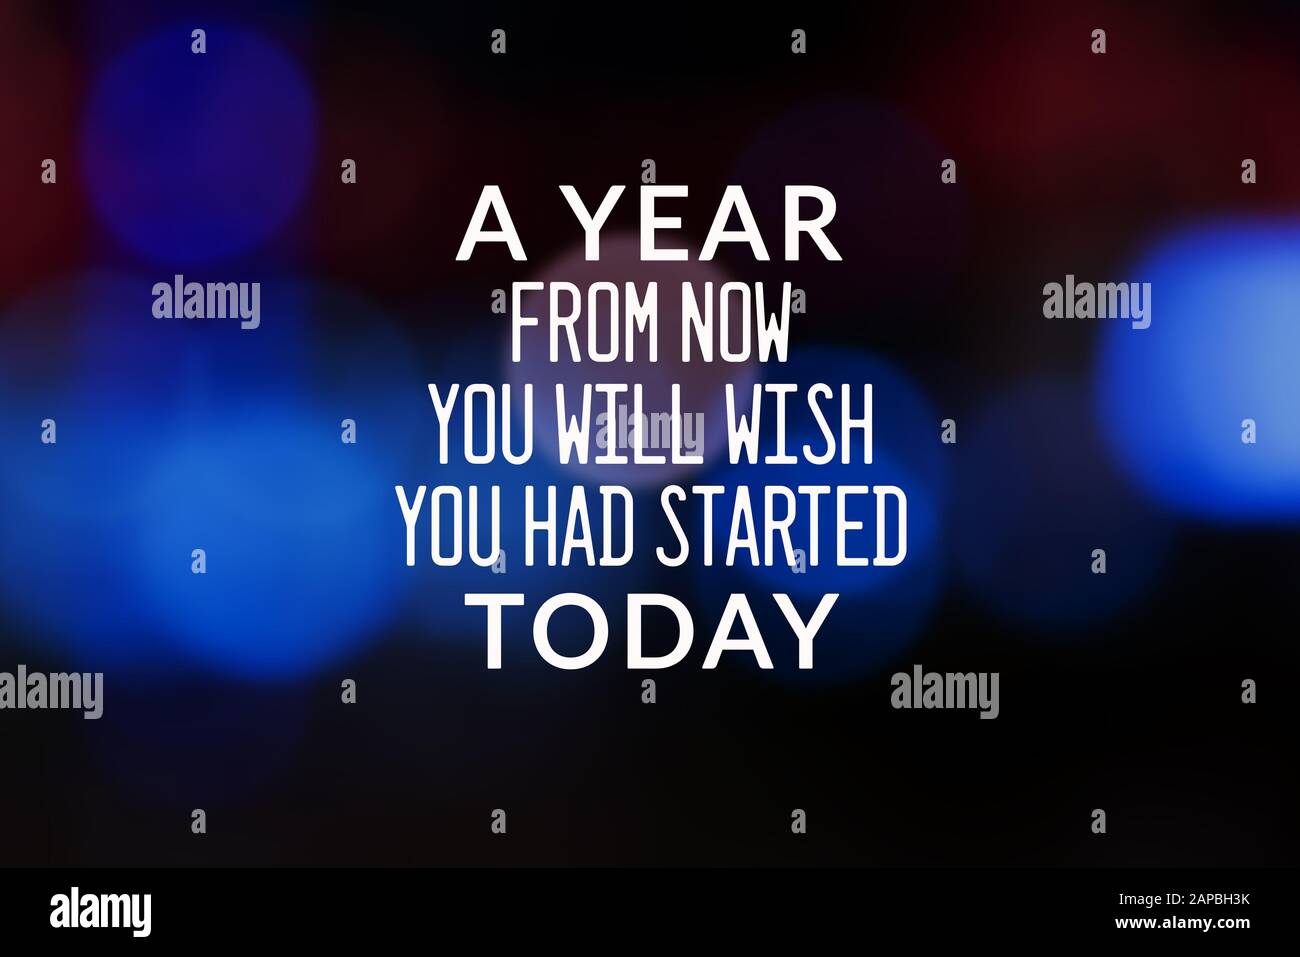 Motivational and Life Inspirational Quotes - A year from now you will wish you had started today. Blurry background. Stock Photo